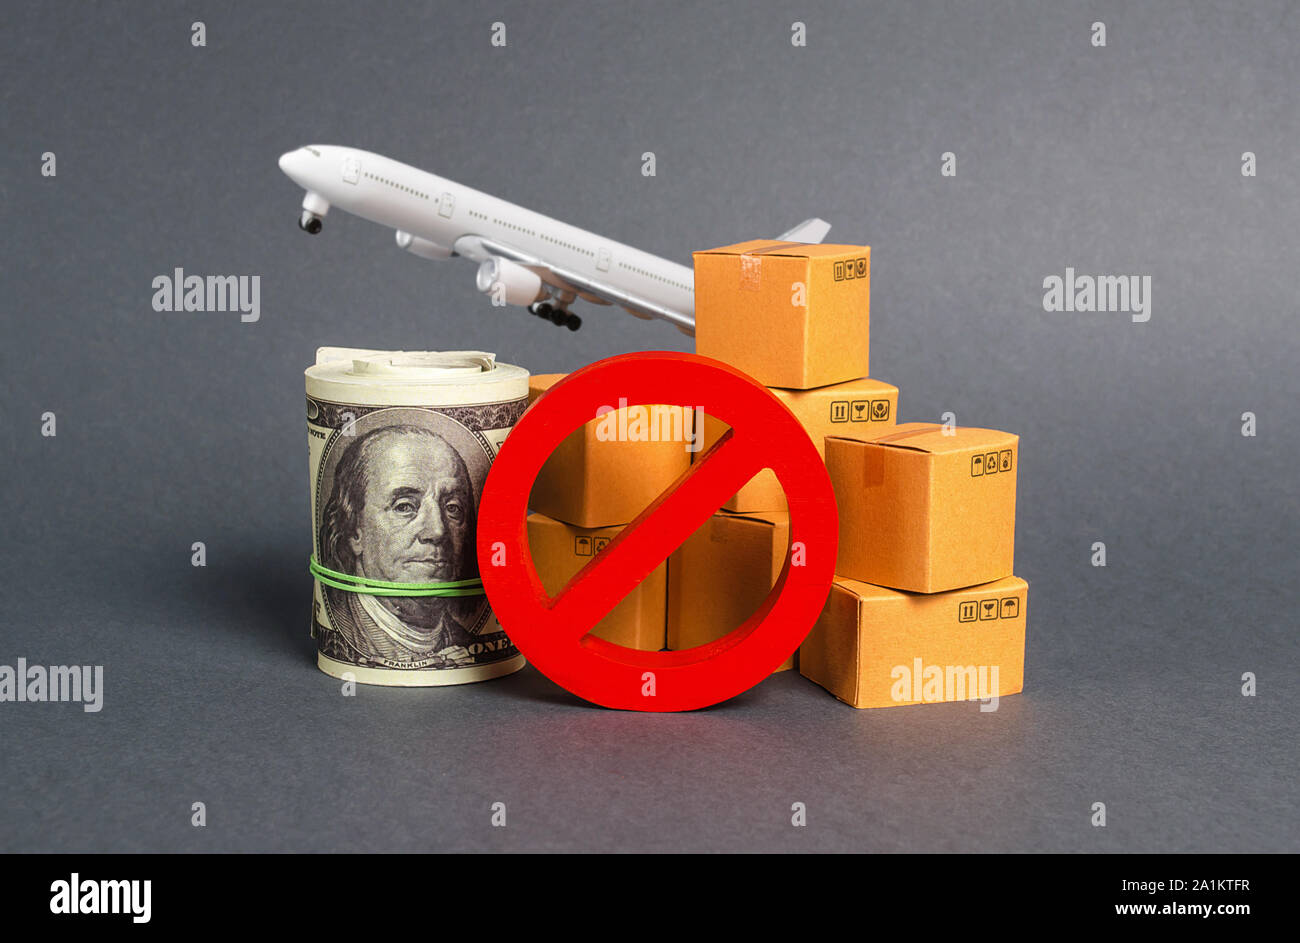 The prohibition sign NO blocks, bundle of dollars money and boxes with a airplane. Embargo, trade wars. Restriction on importation goods, proprietary Stock Photo